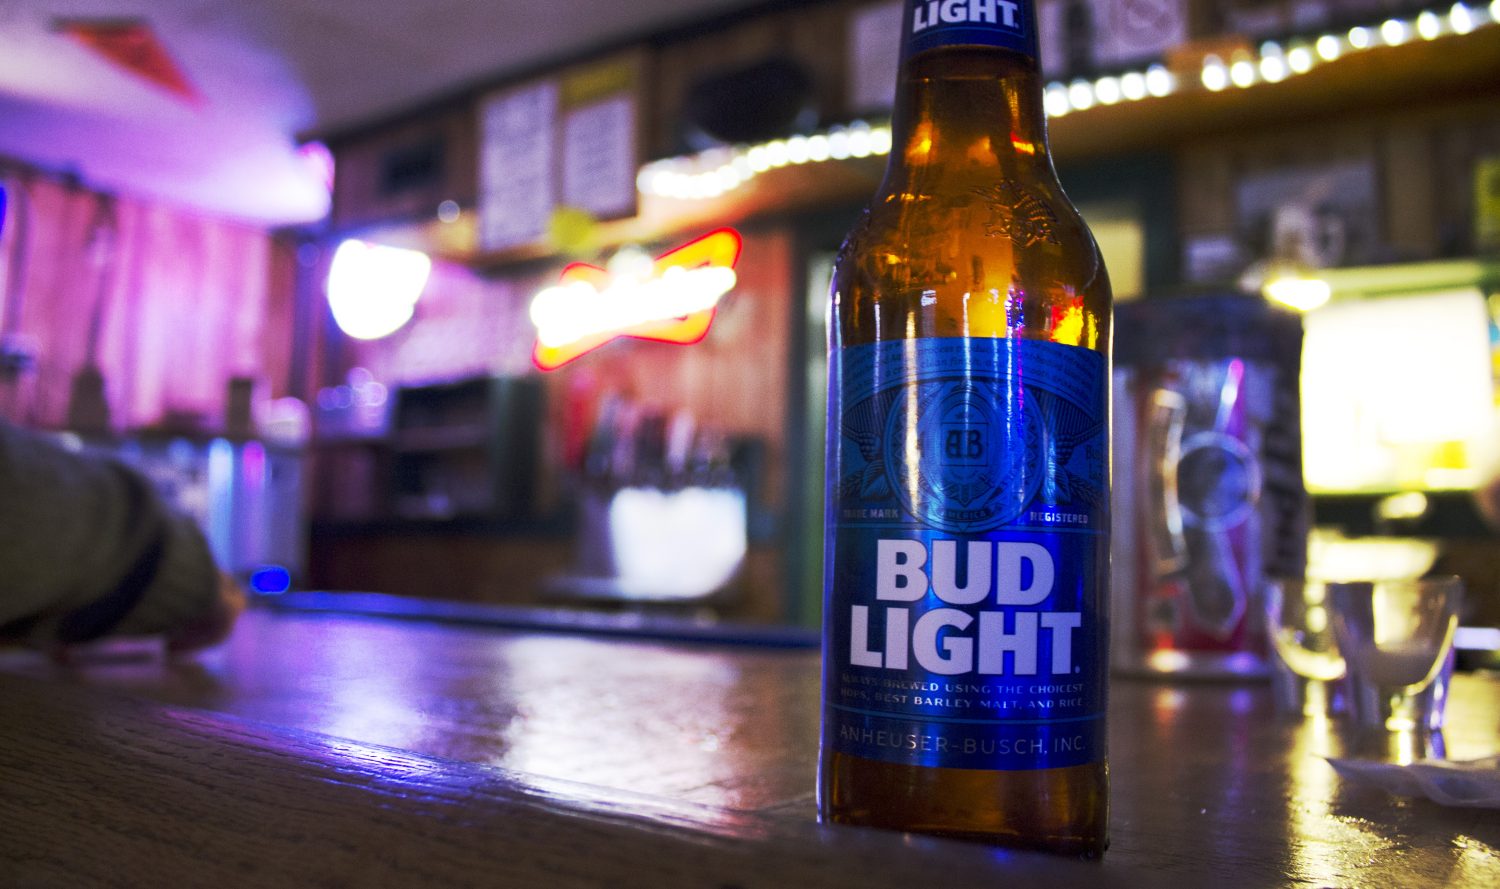 The Salt Mine offers many choices of beverages, including one of the main favorites, Bud Light. Image by Lexi Loya.